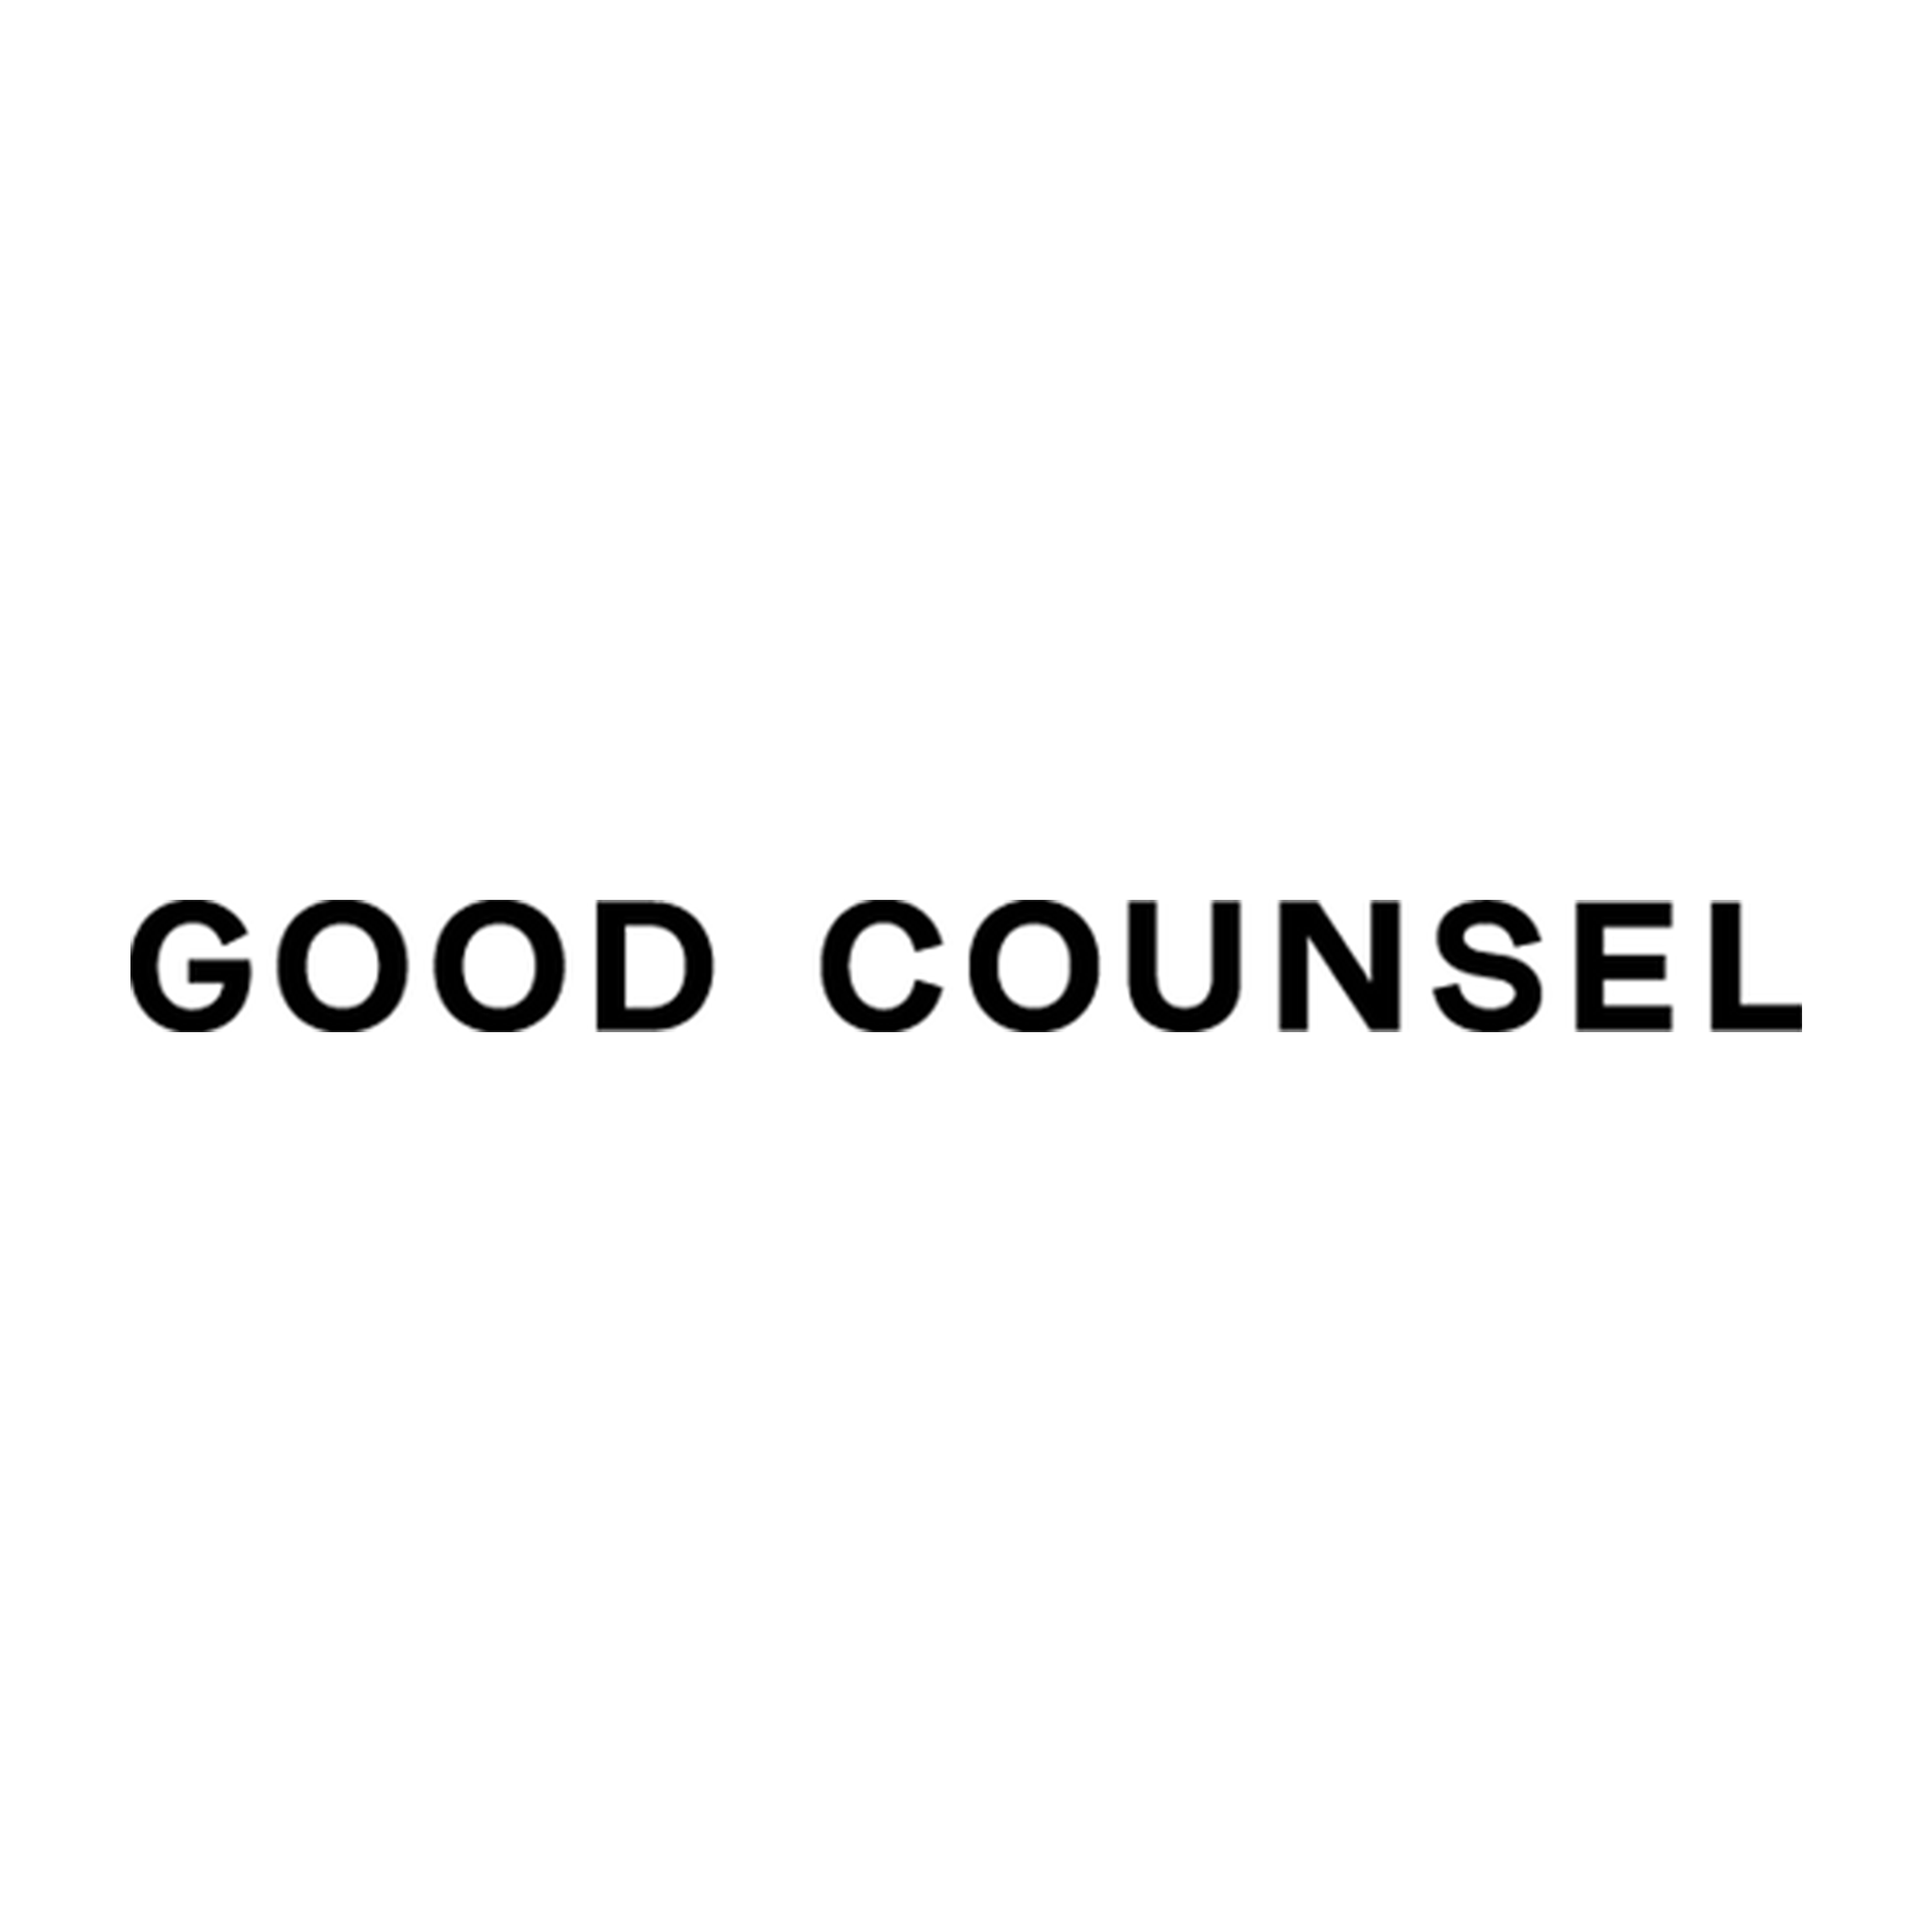 Good Counsel